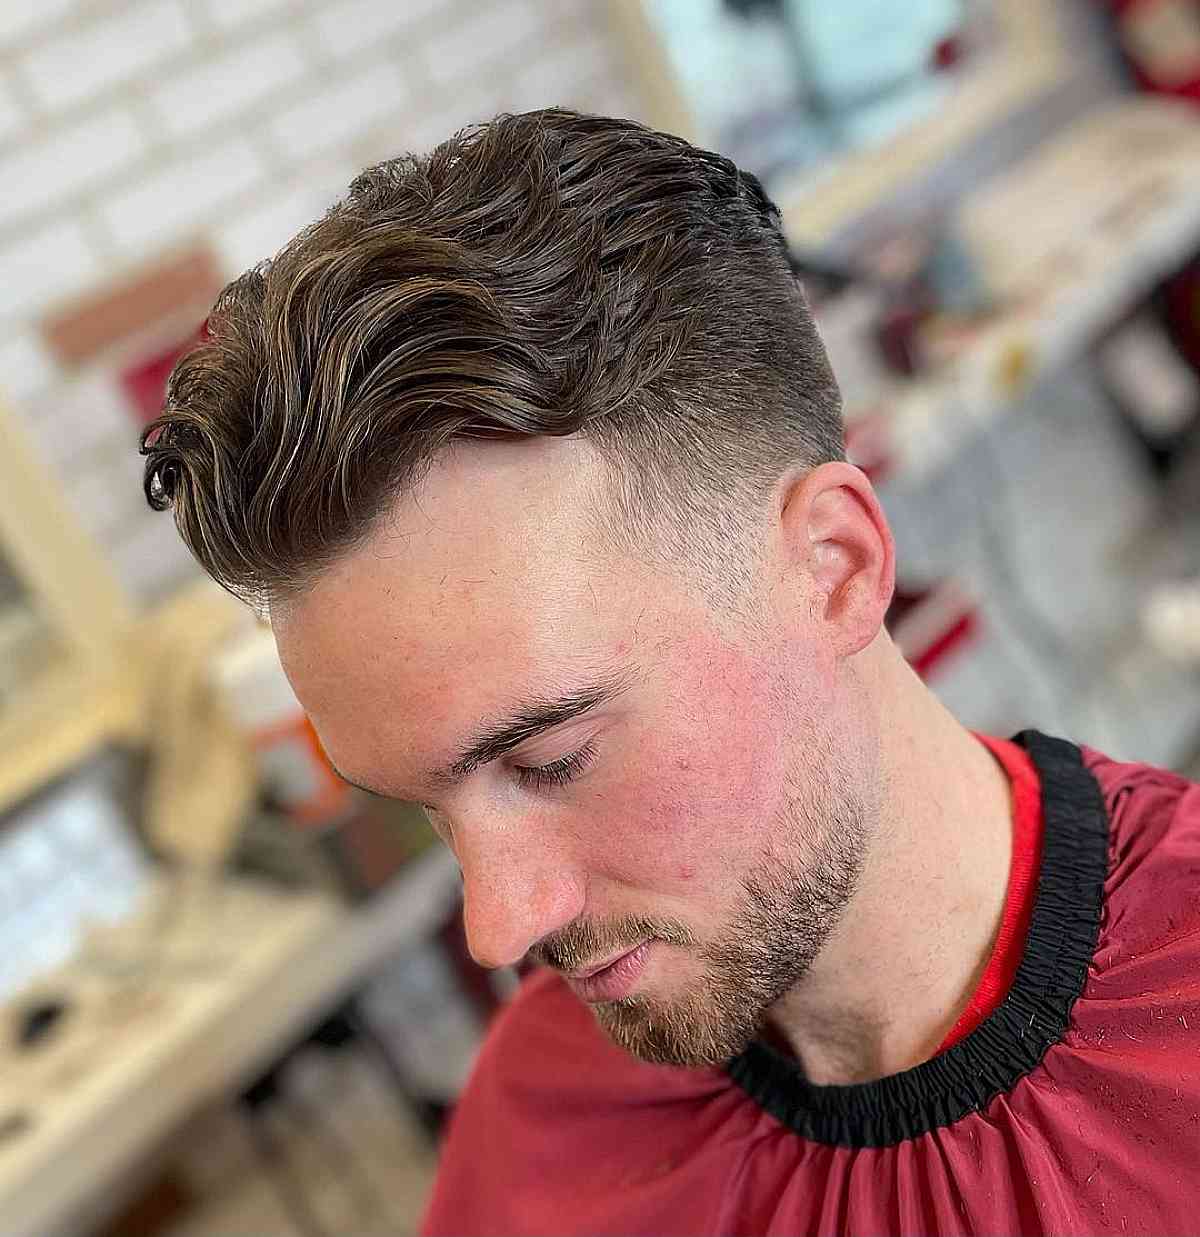 Awesome Wavy Hair with Short Fade for Men